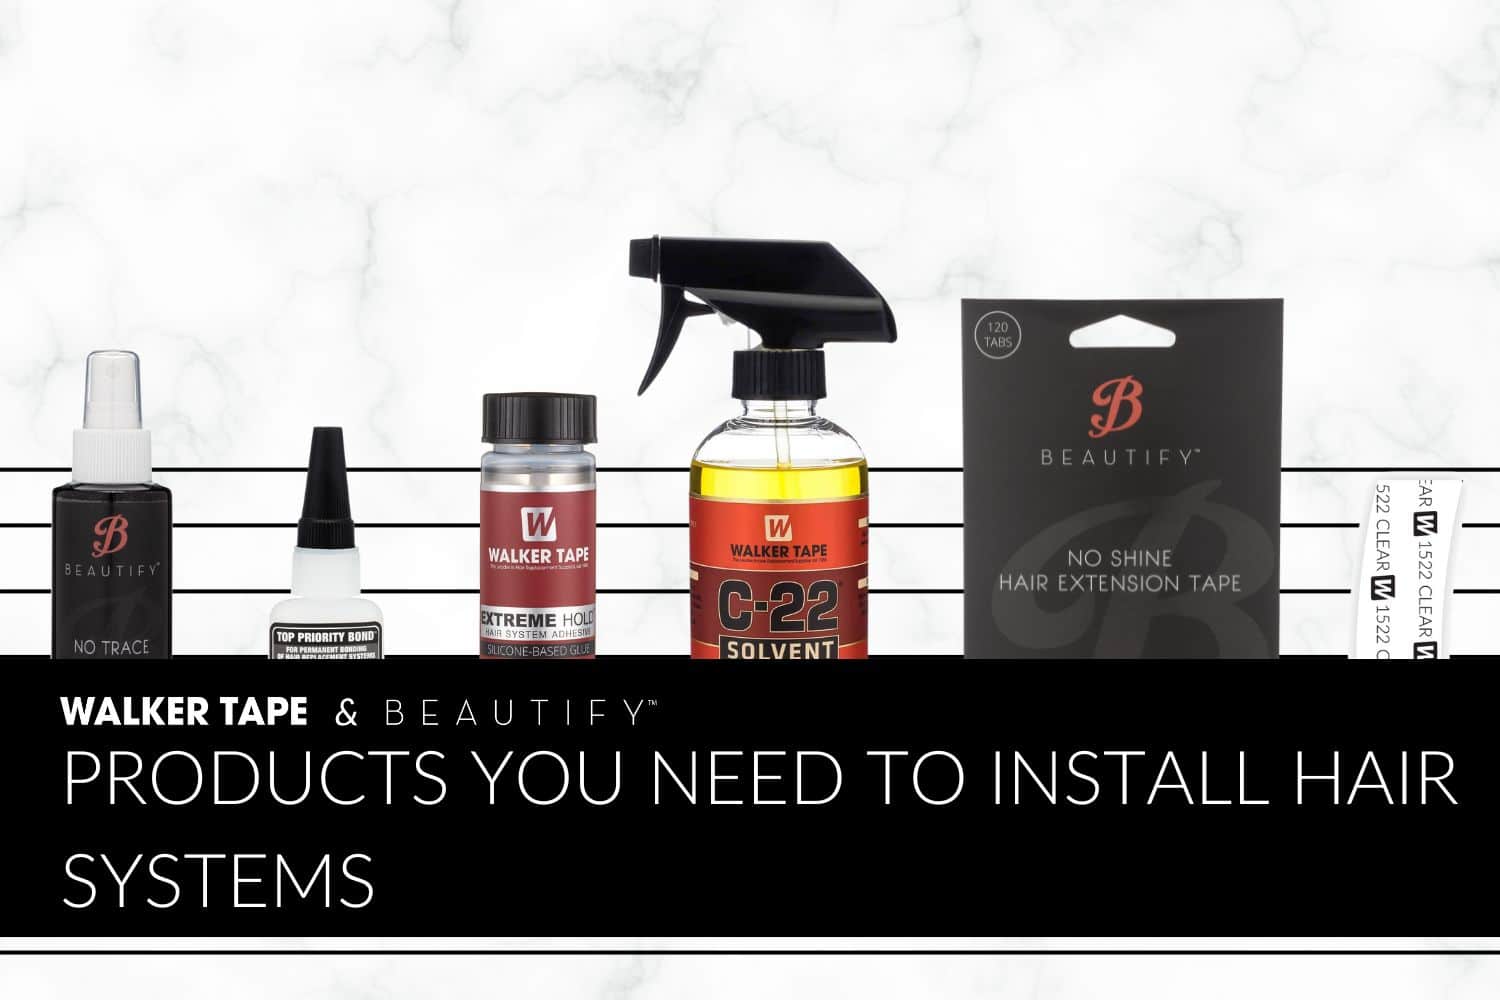 Products You Need to Install Hair Systems - Graphic